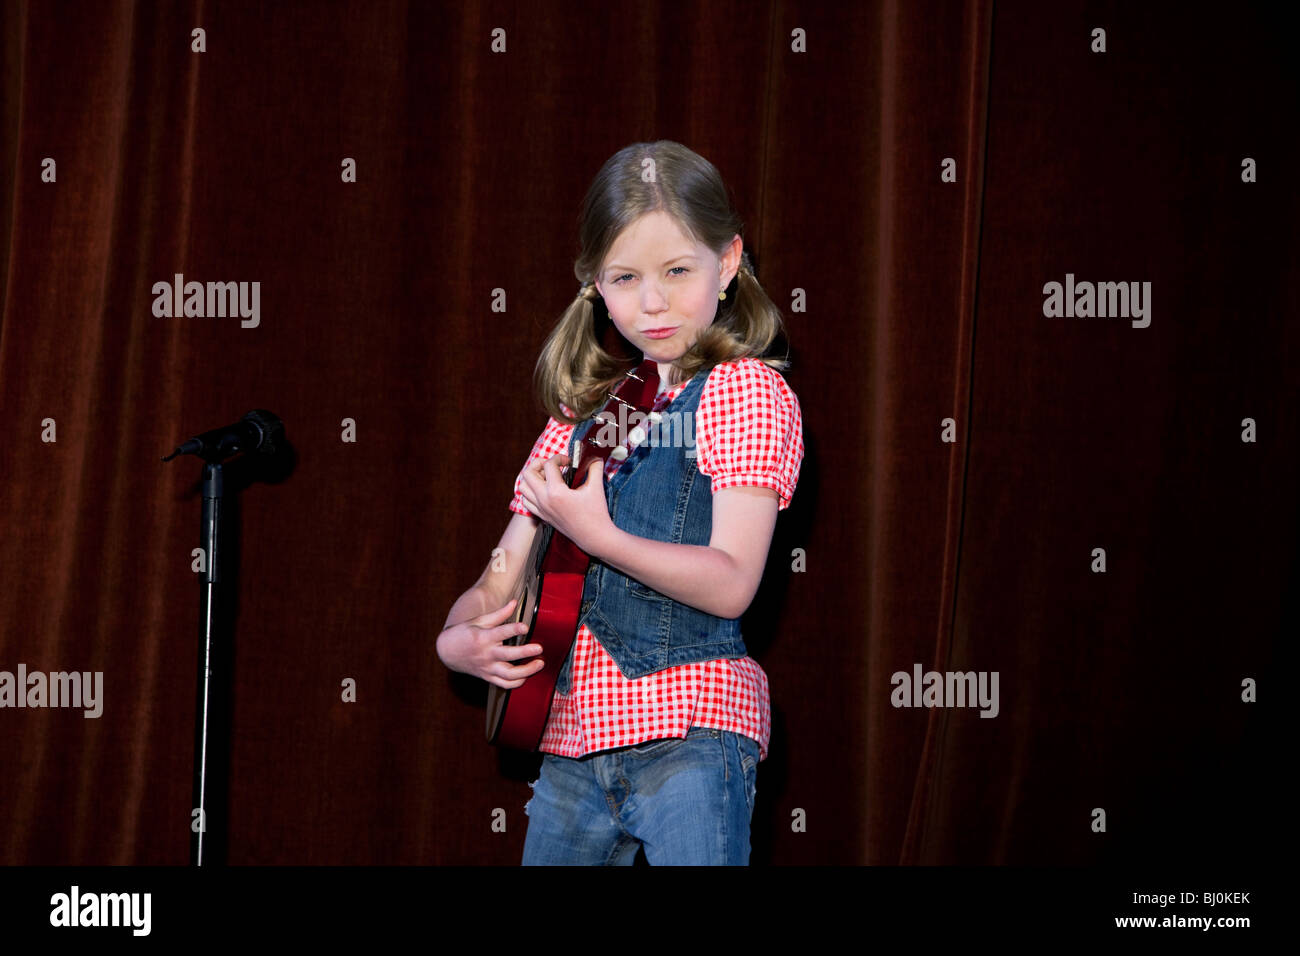 young girl playing guitar on stage Stock Photo